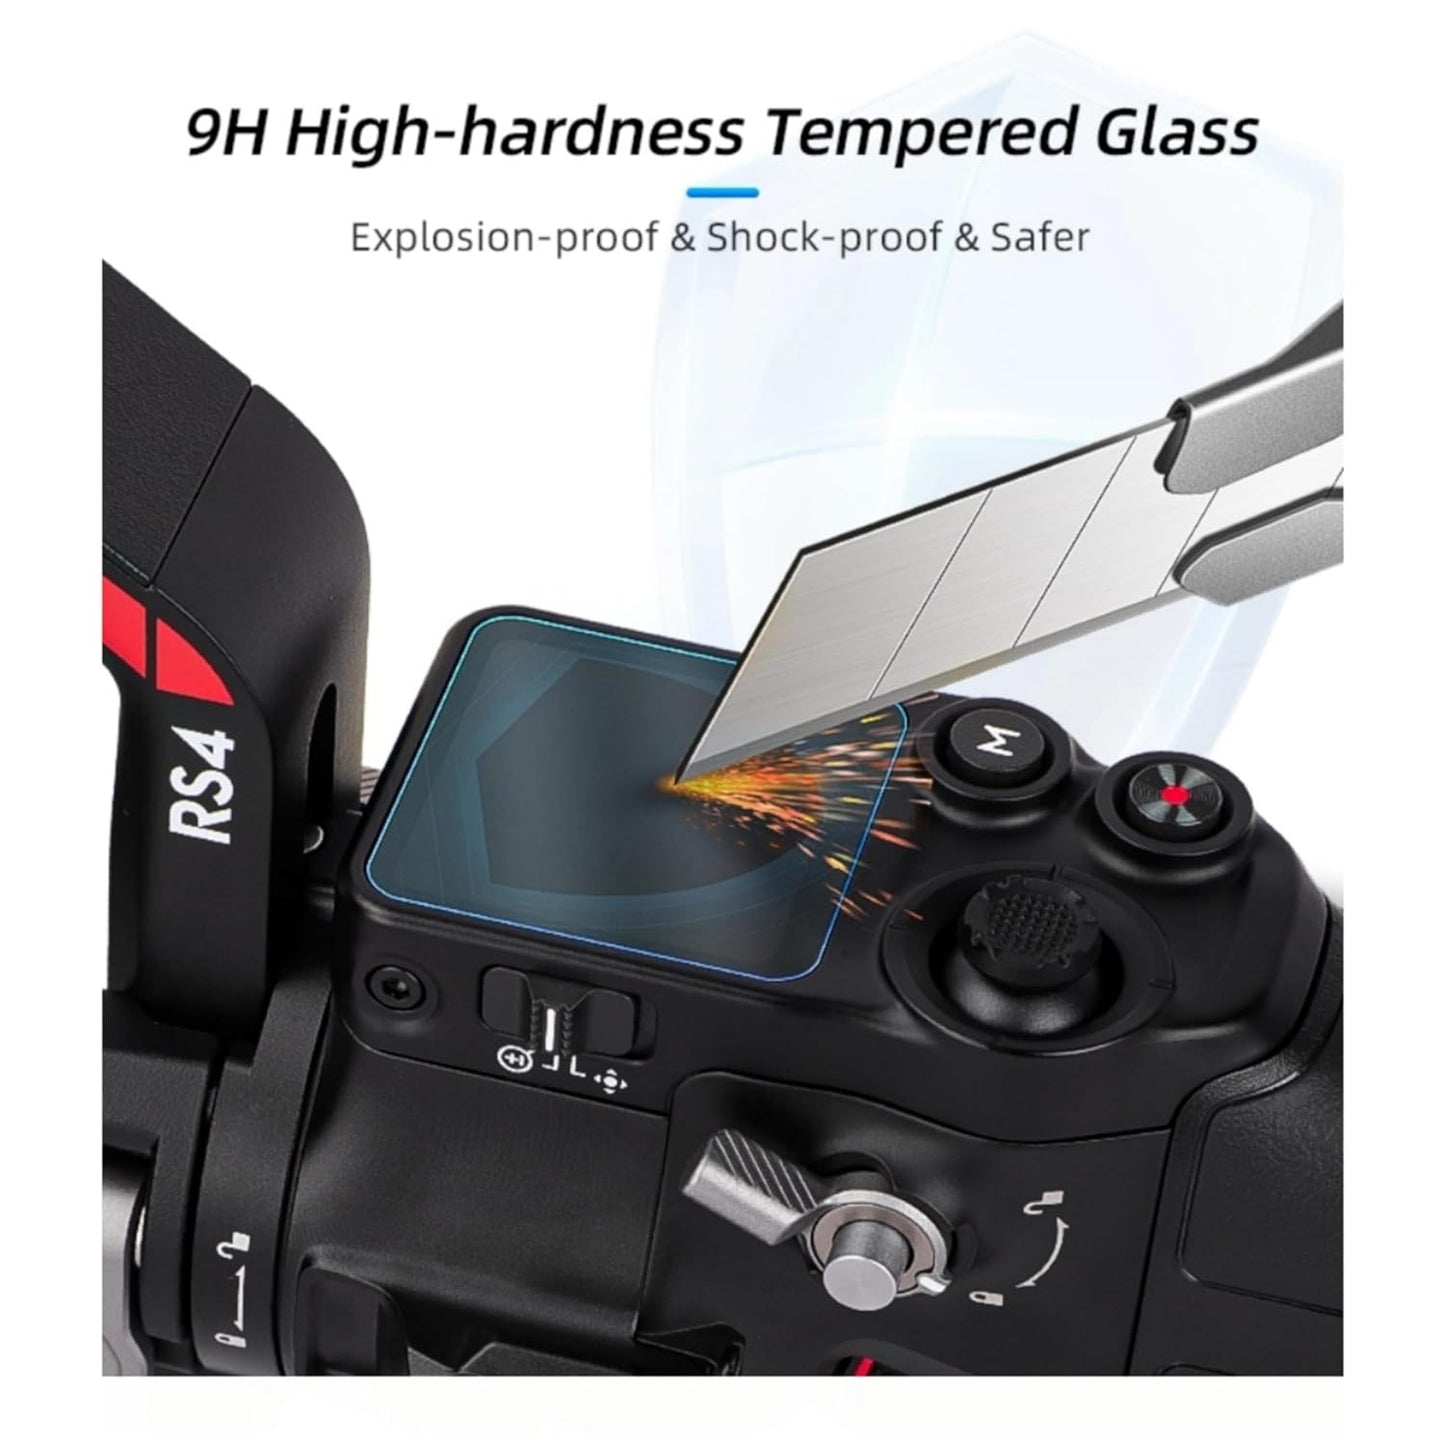 GetZget® Tempered Glass Compatible with Dji Ronin Rs 4 Gimbal screen protector Guard 9H Hardness 2d Curved edge HD Clarity accessories(Pack of 2 Glass)